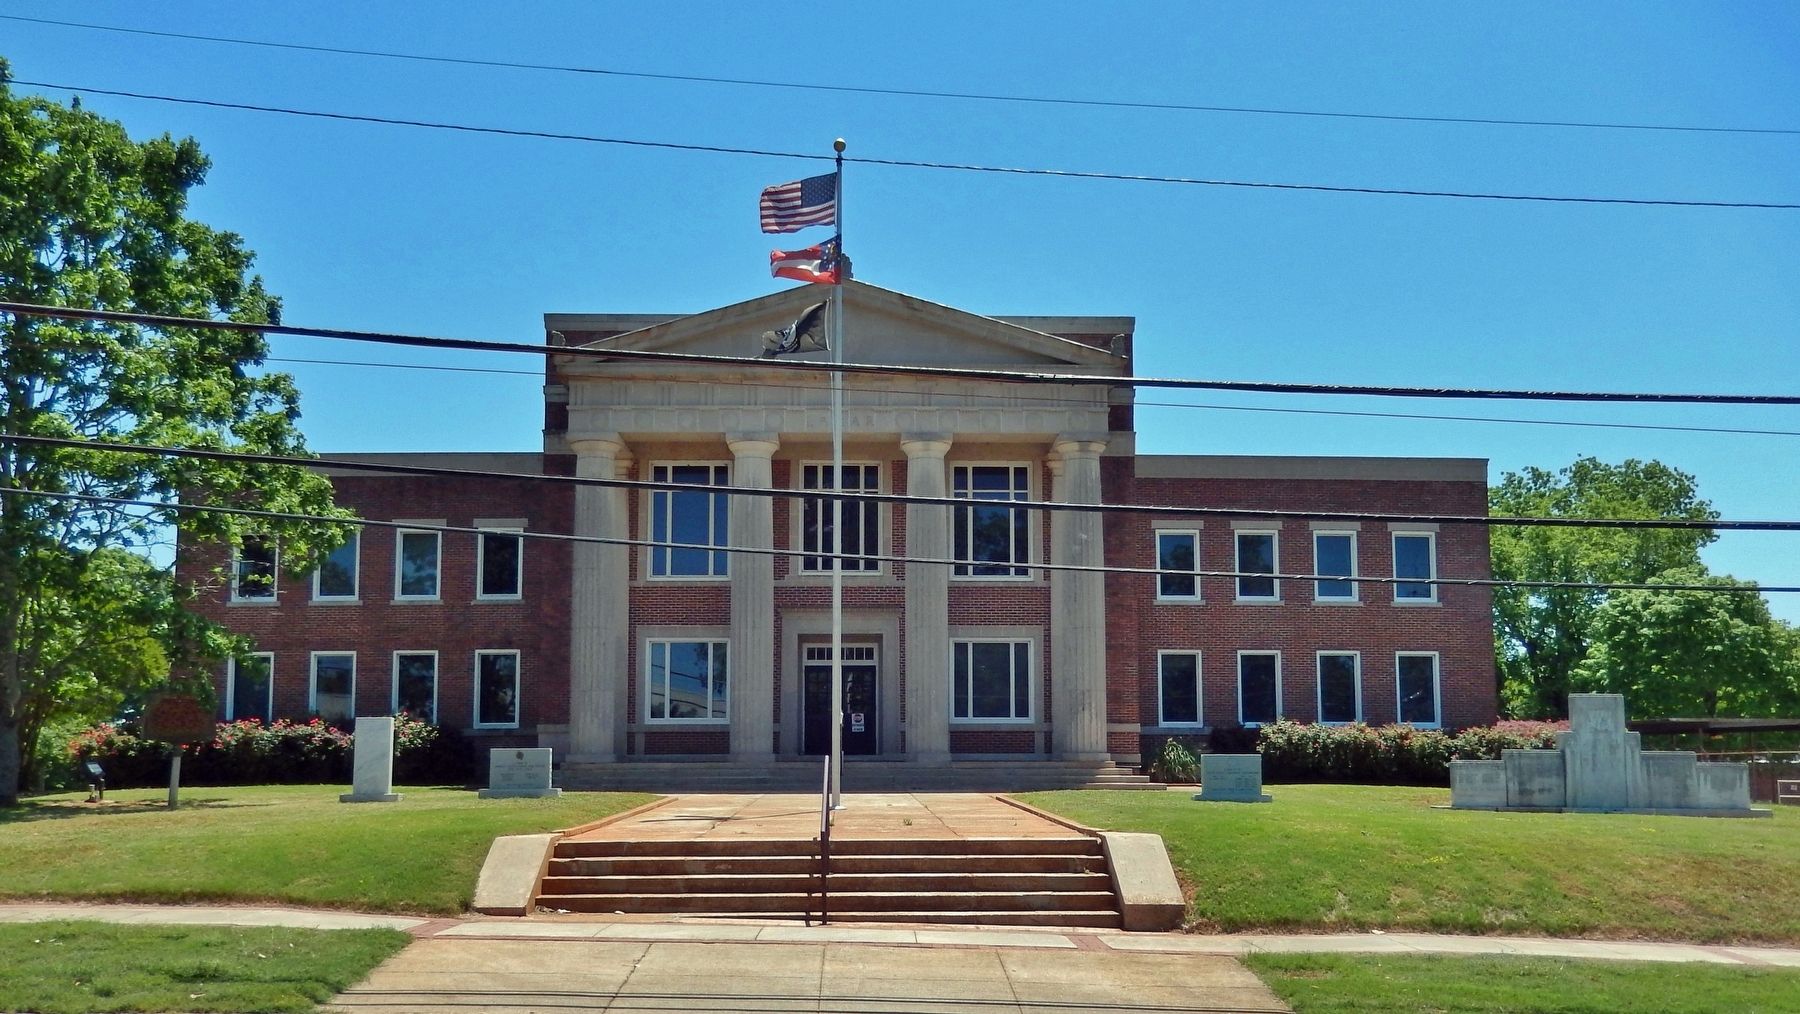 Lamar County Courthouse (<i>west/front elevation</i>) image. Click for full size.